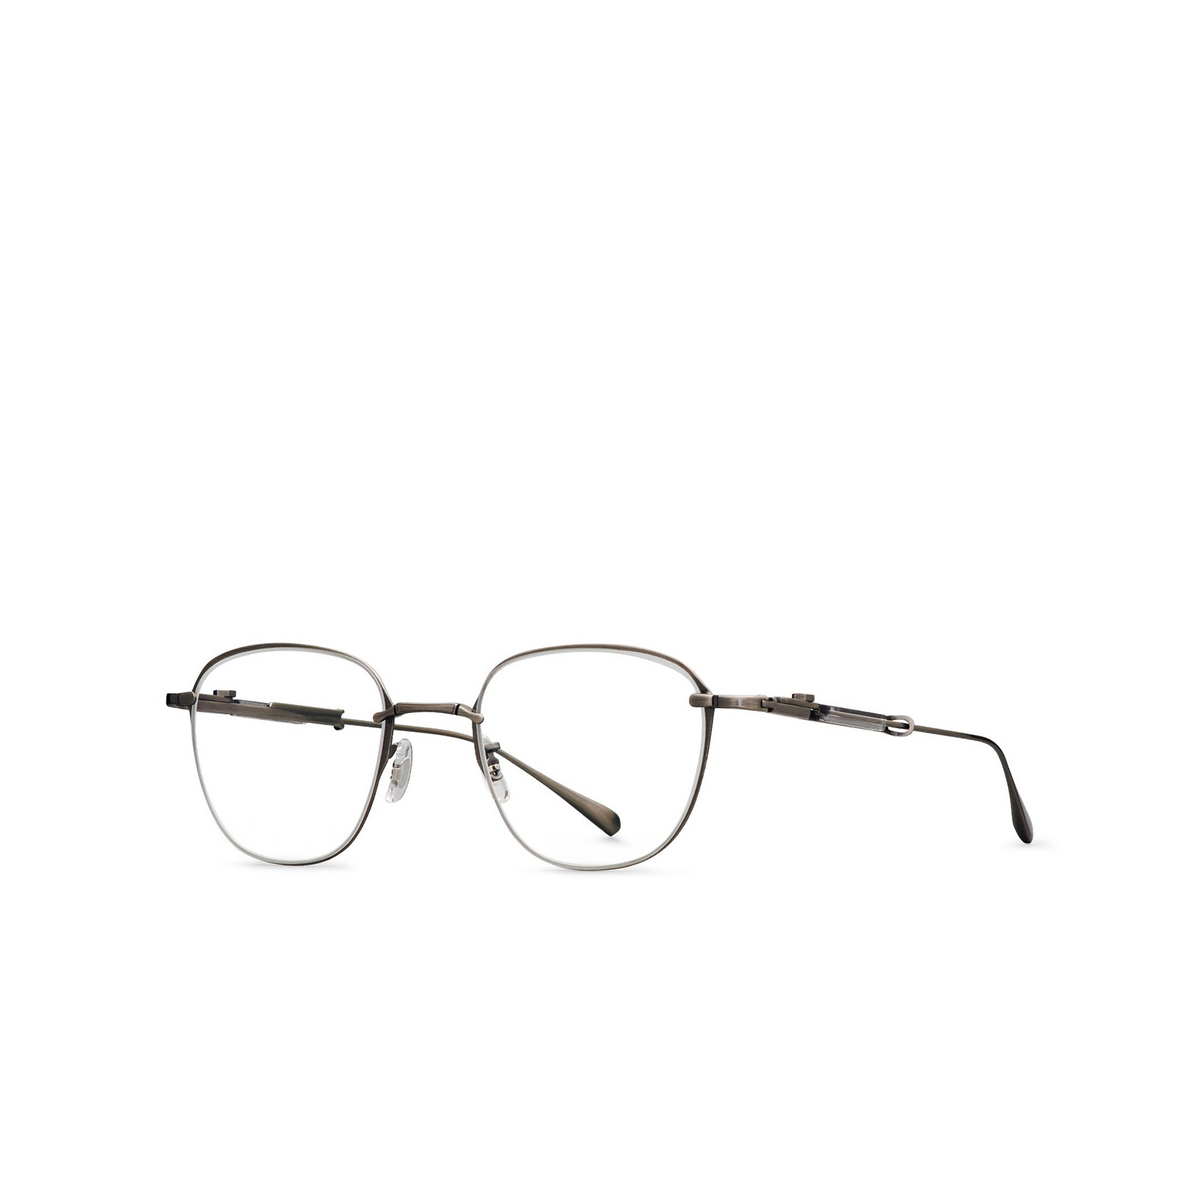 Mr. Leight GRIFFITH CL Eyeglasses PW-GRYSTN Pewter-Greystone - three-quarters view